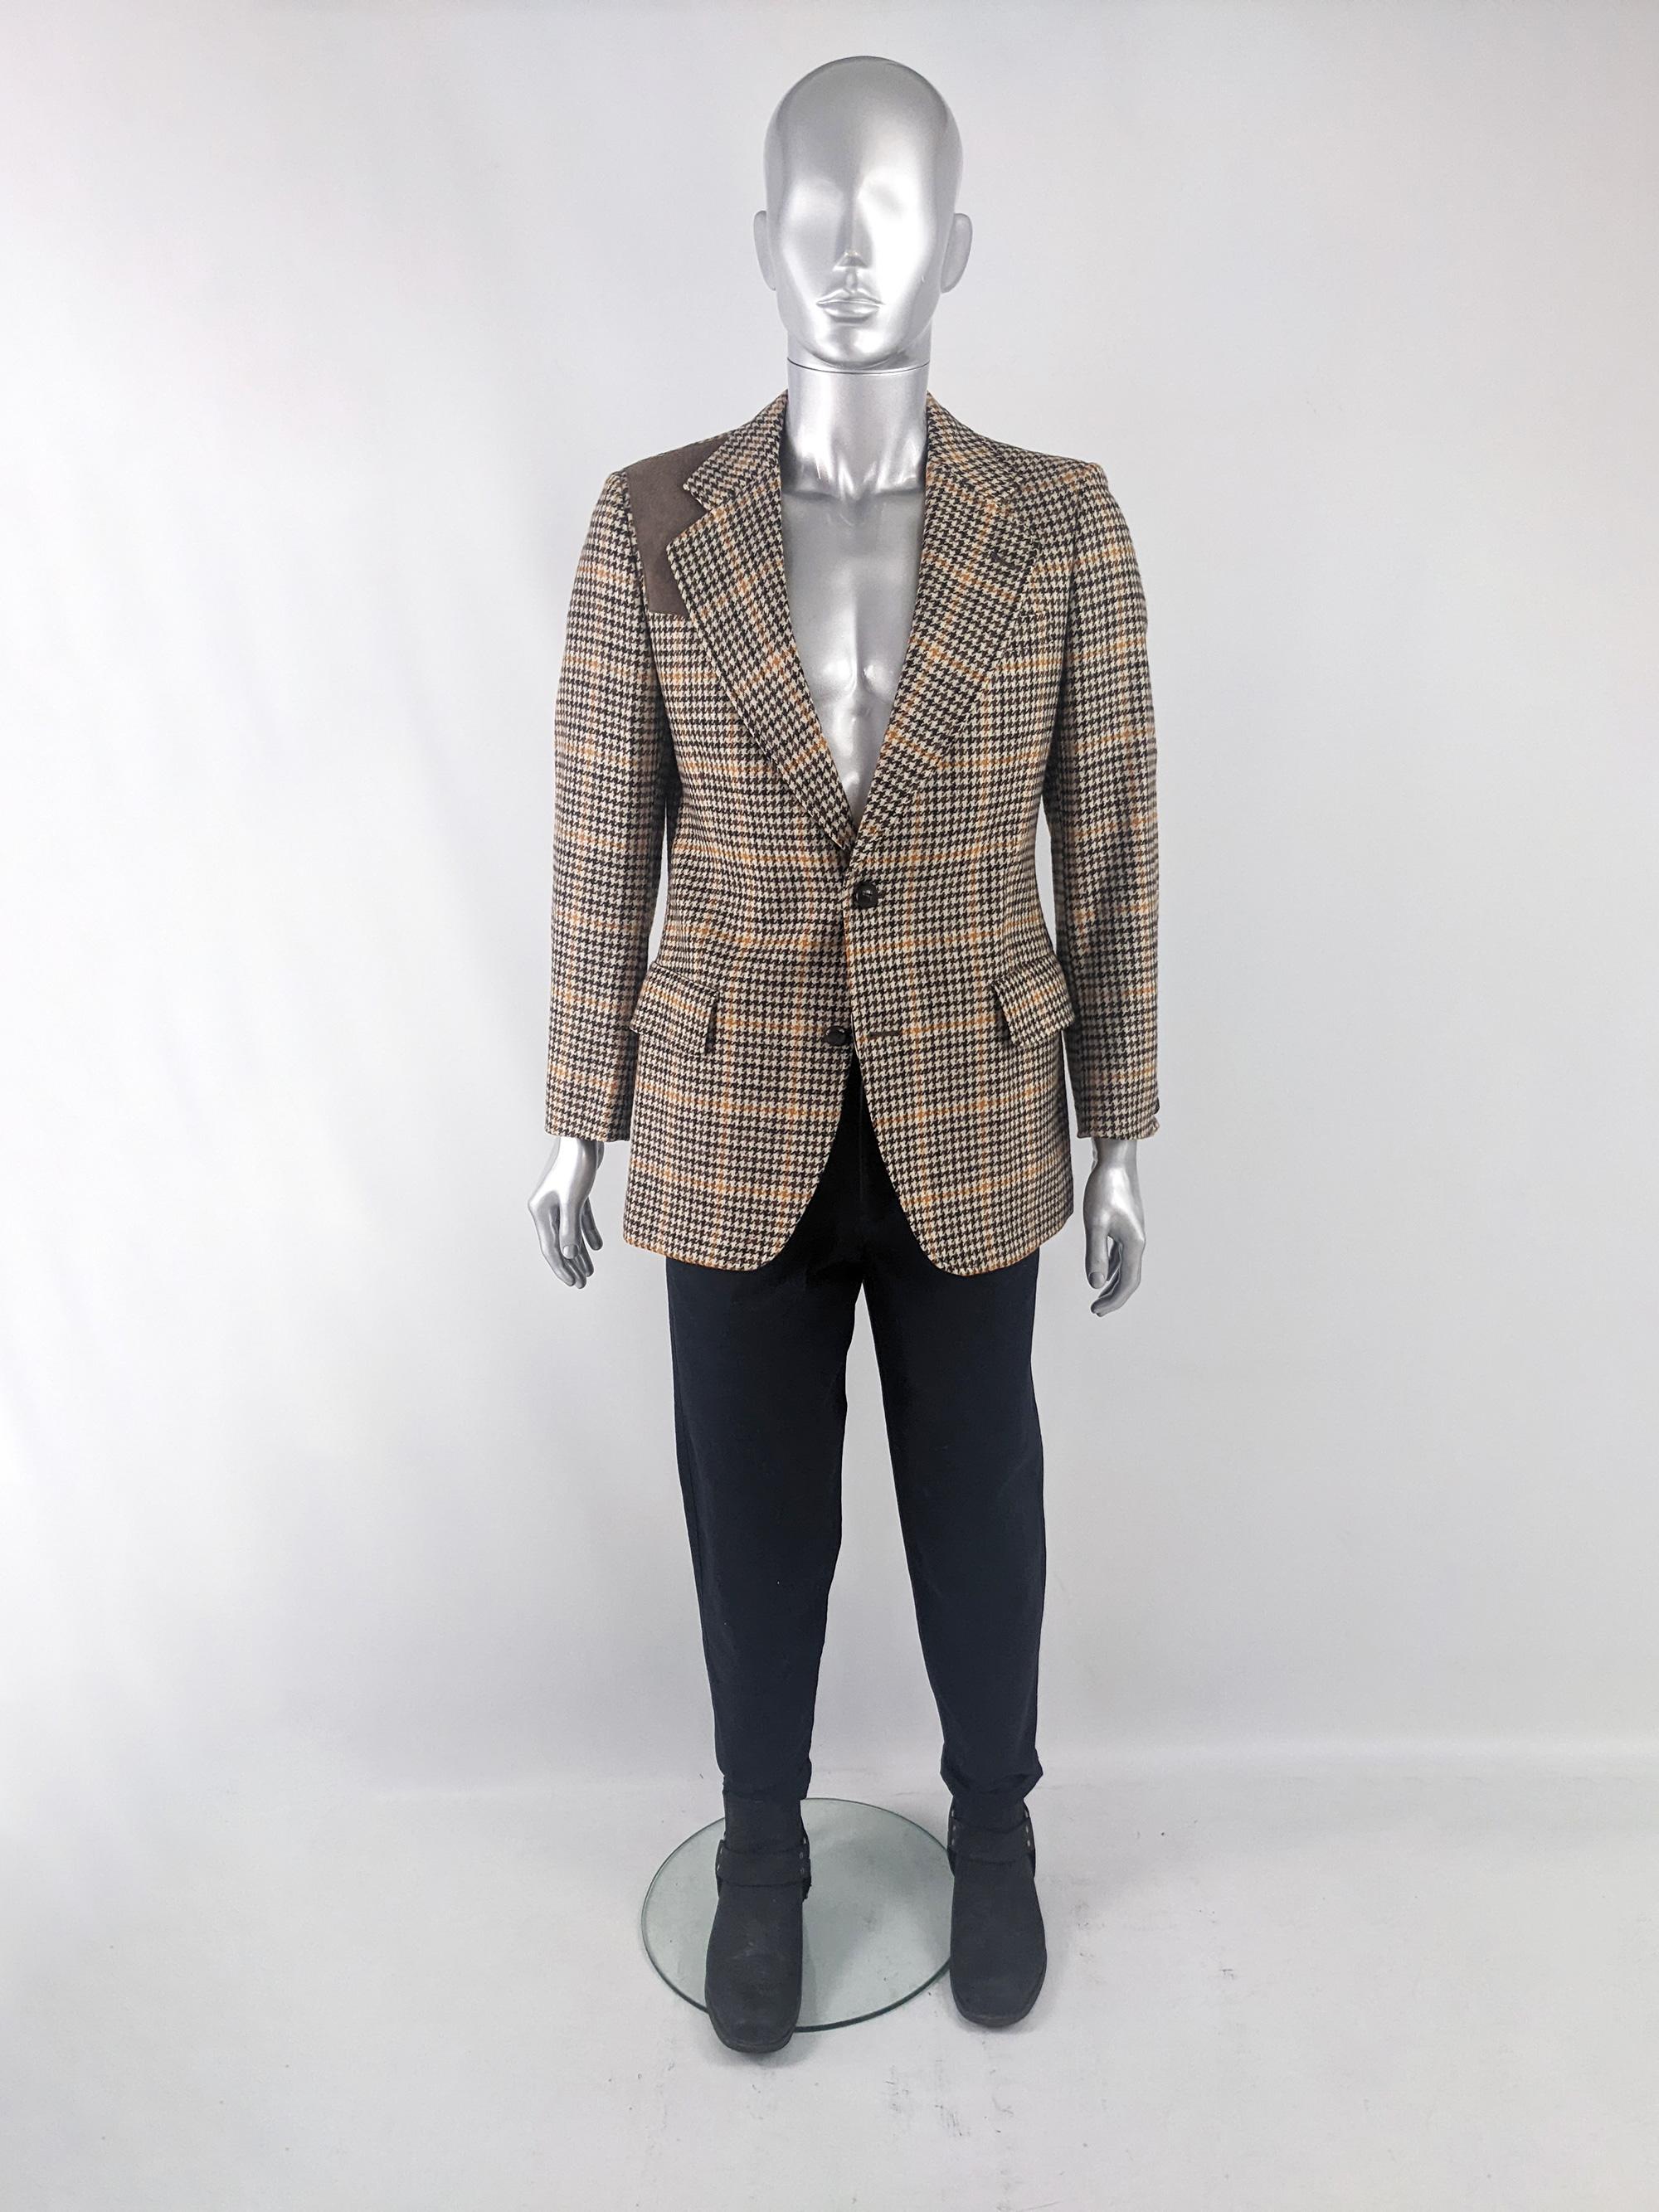 A stylish vintage mens tweed blazer jacket from the 70s by British label, Austin Reed. In a Manx tweed (from a rare breed of sheep on the Isle of Man) with a suede patch on the shoulder. It has single breasted buttons and a double vent to the